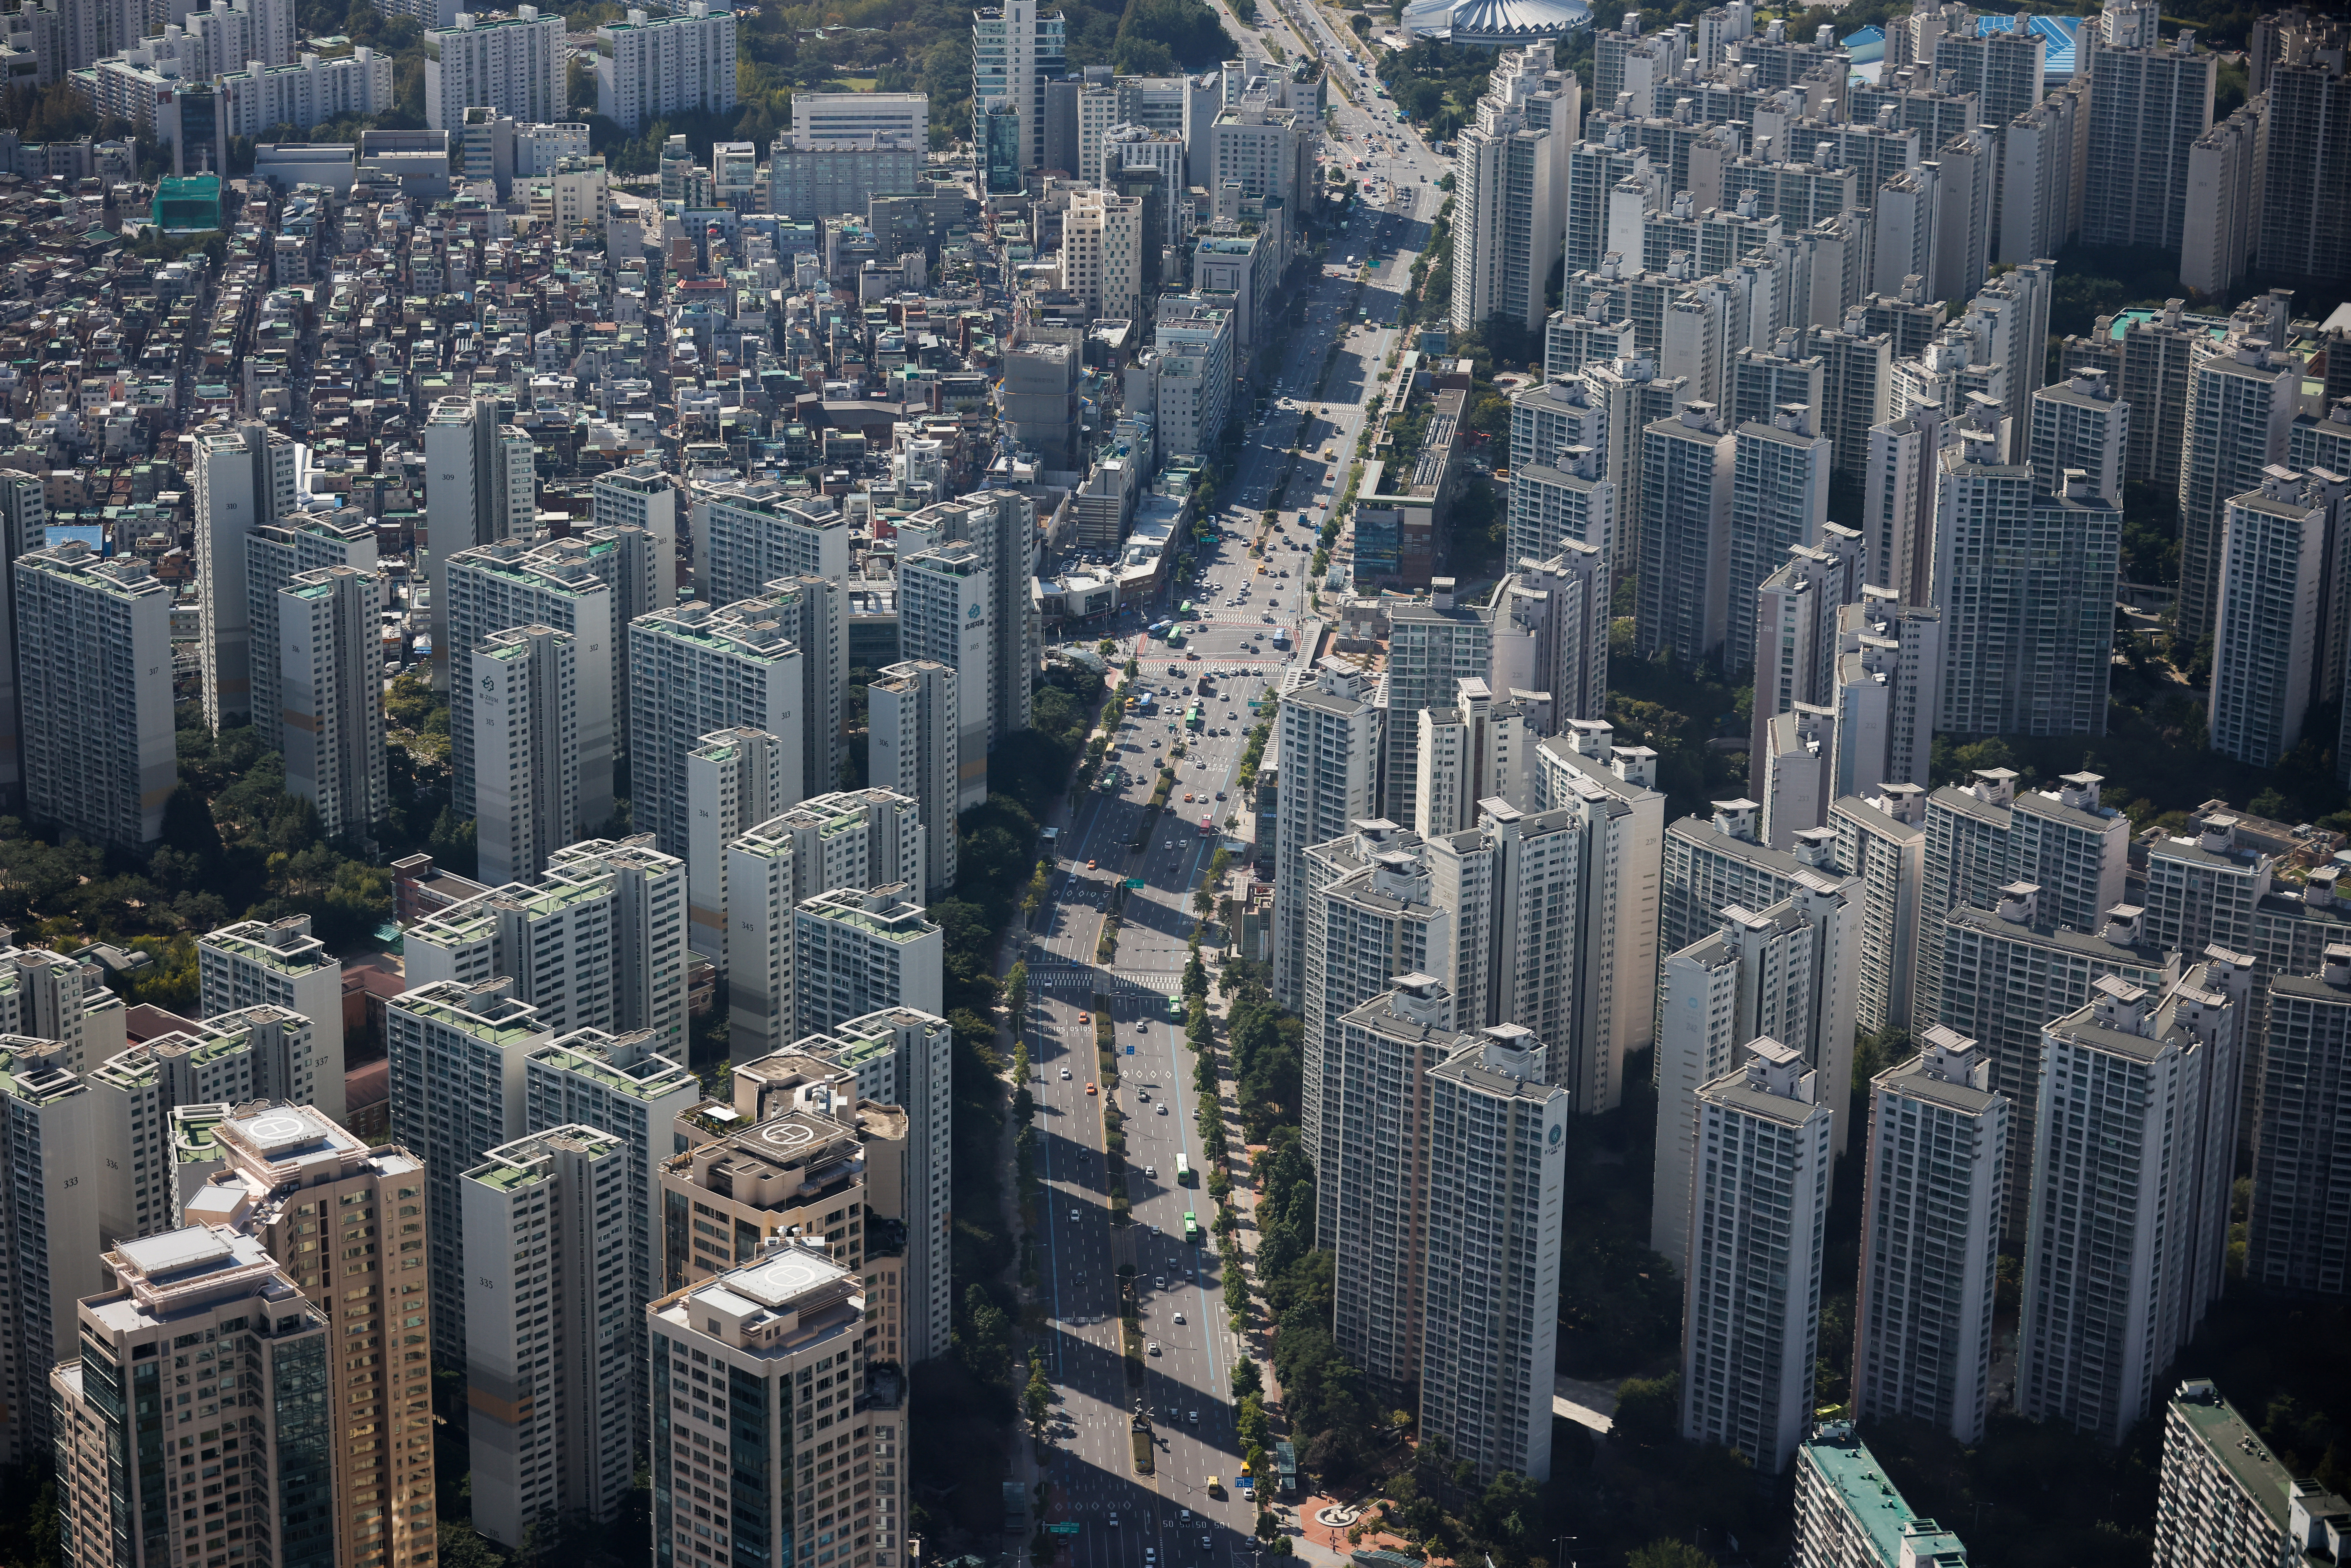 An aerial view shows apartment complexes  in Seoul